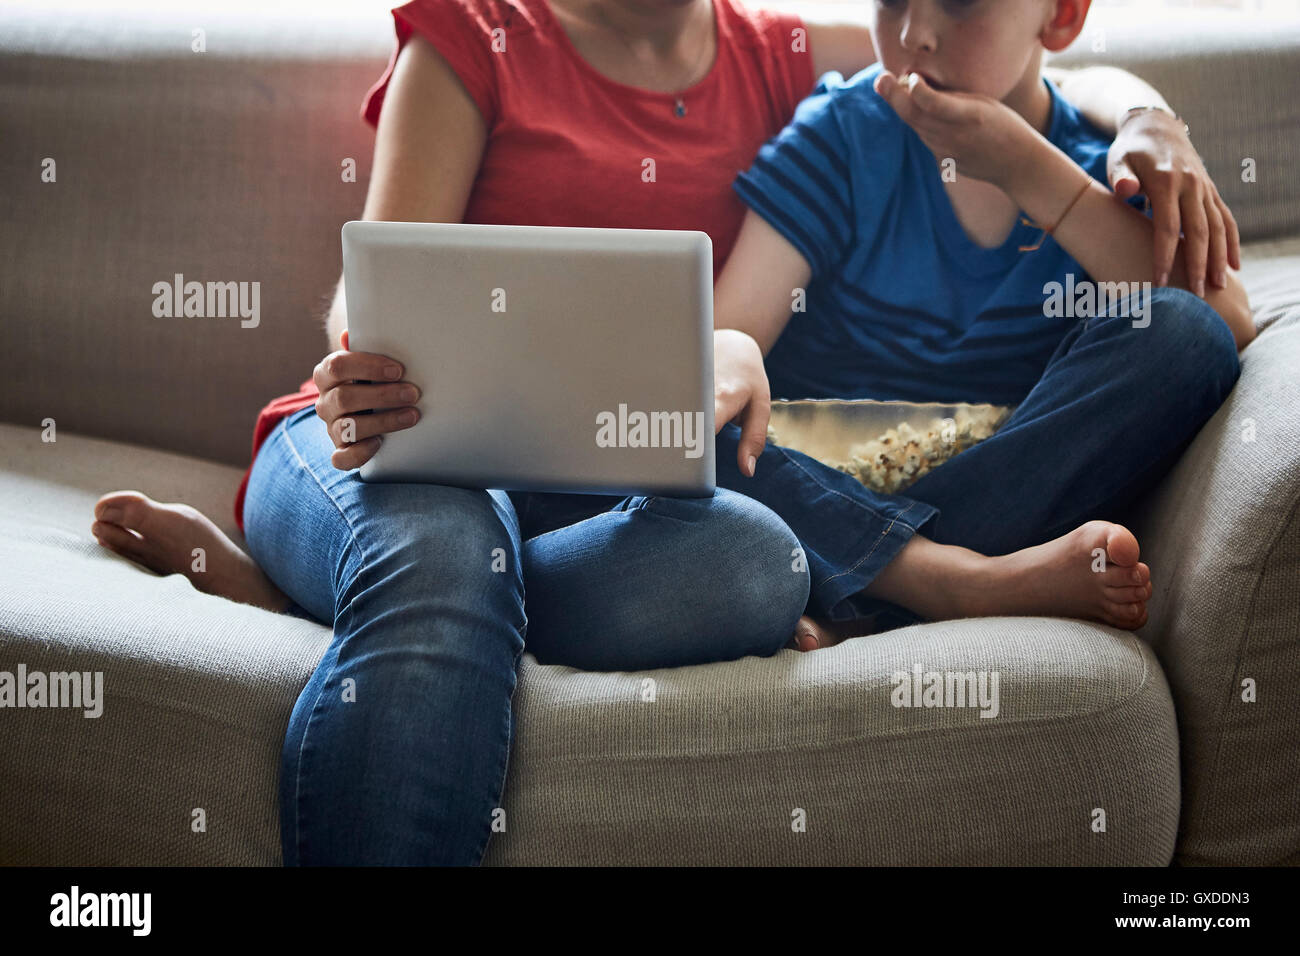 Cropped view of mother and son on sofa with popcorn using smartphone Stock Photo